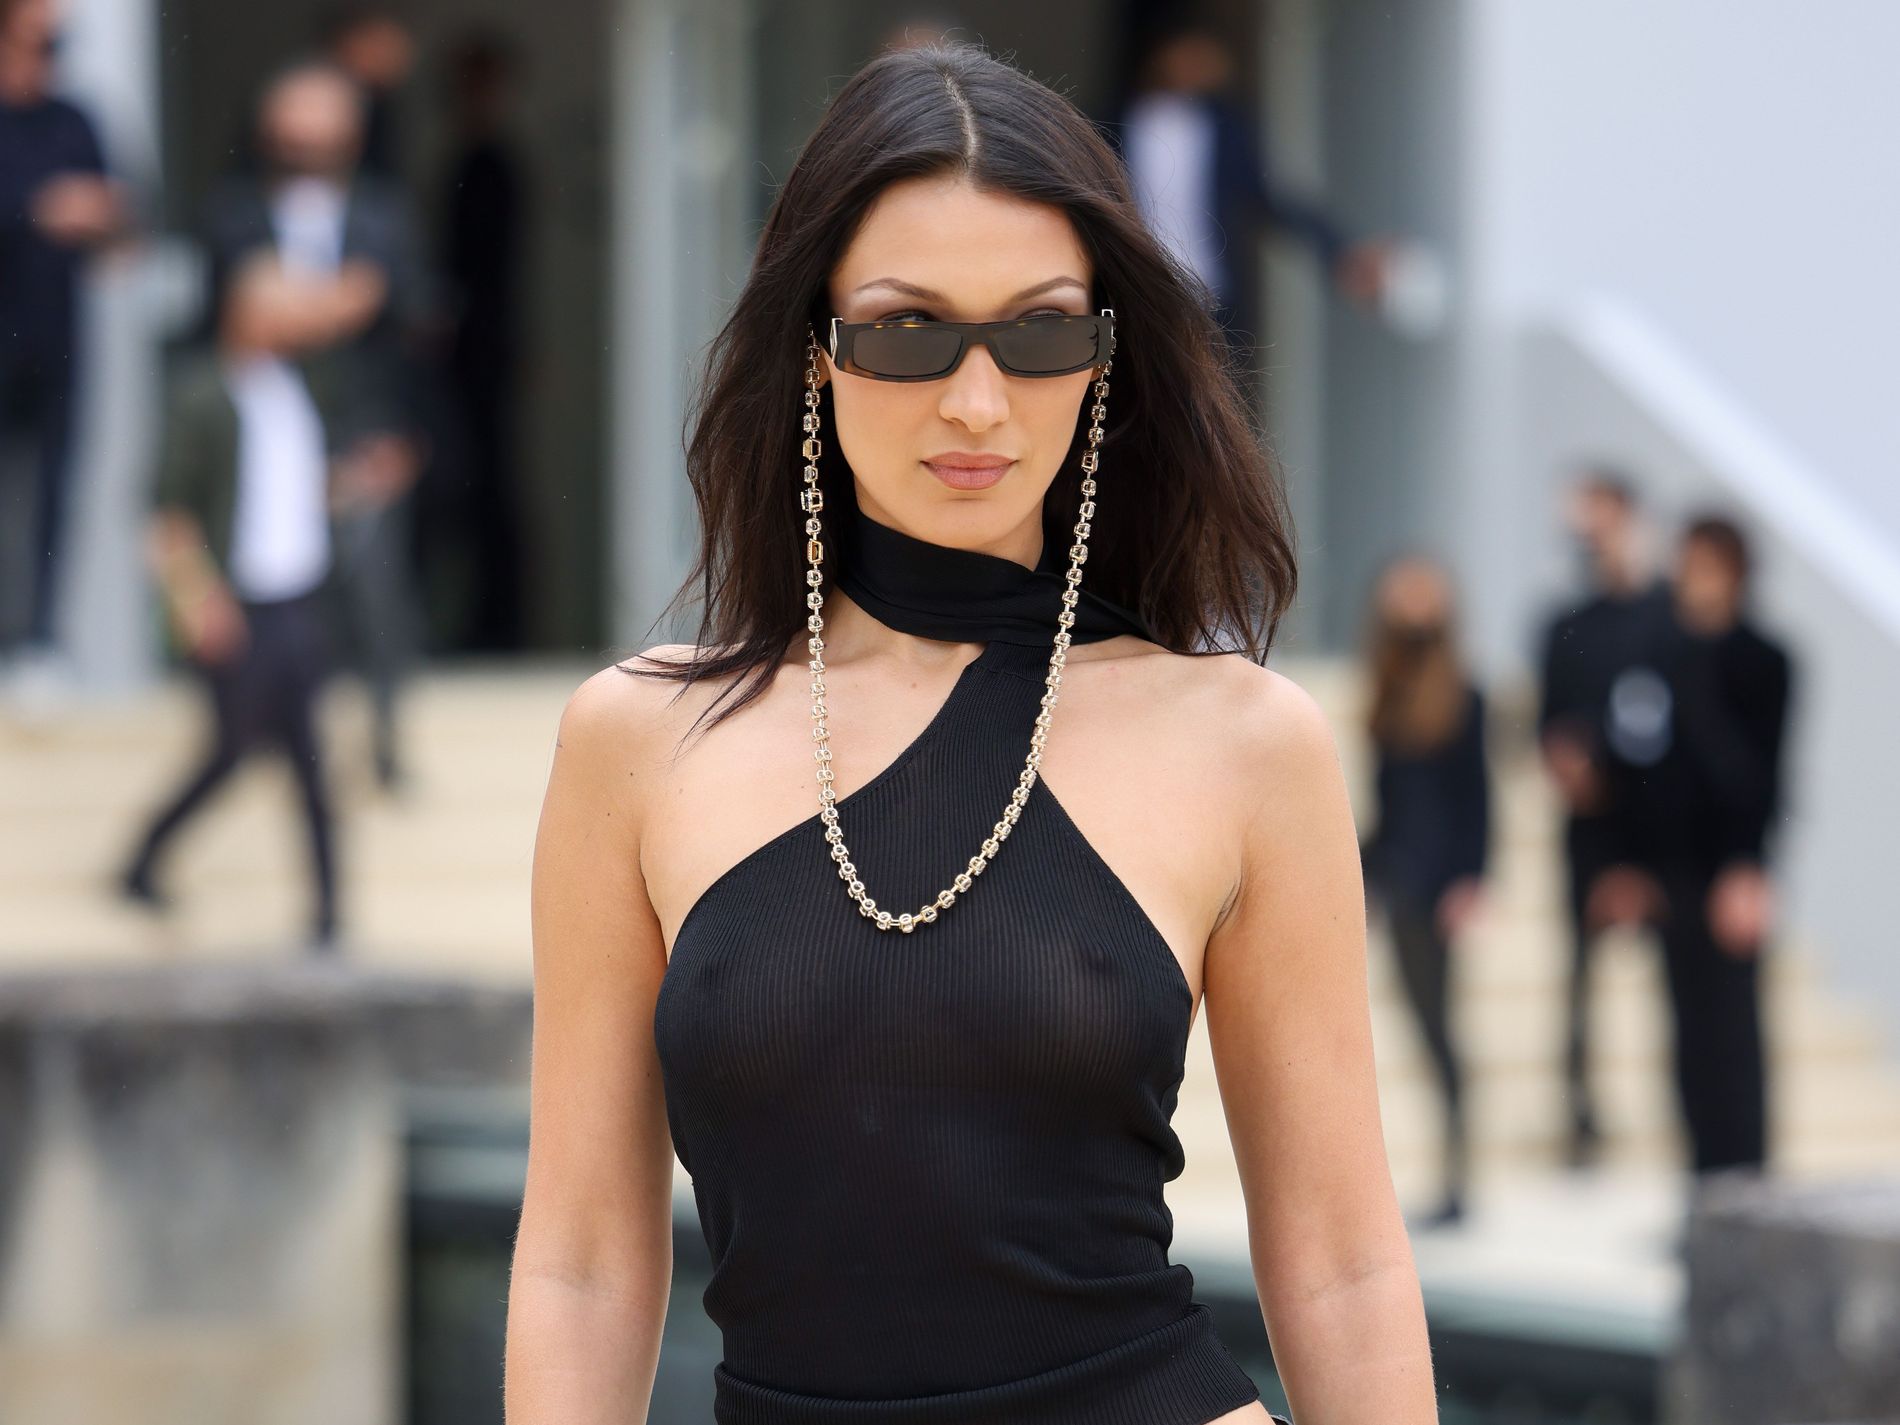  Model Bella Hadid attends the Dior Homme Menswear Spring Summer 2022 show as part of Paris Fashion Week